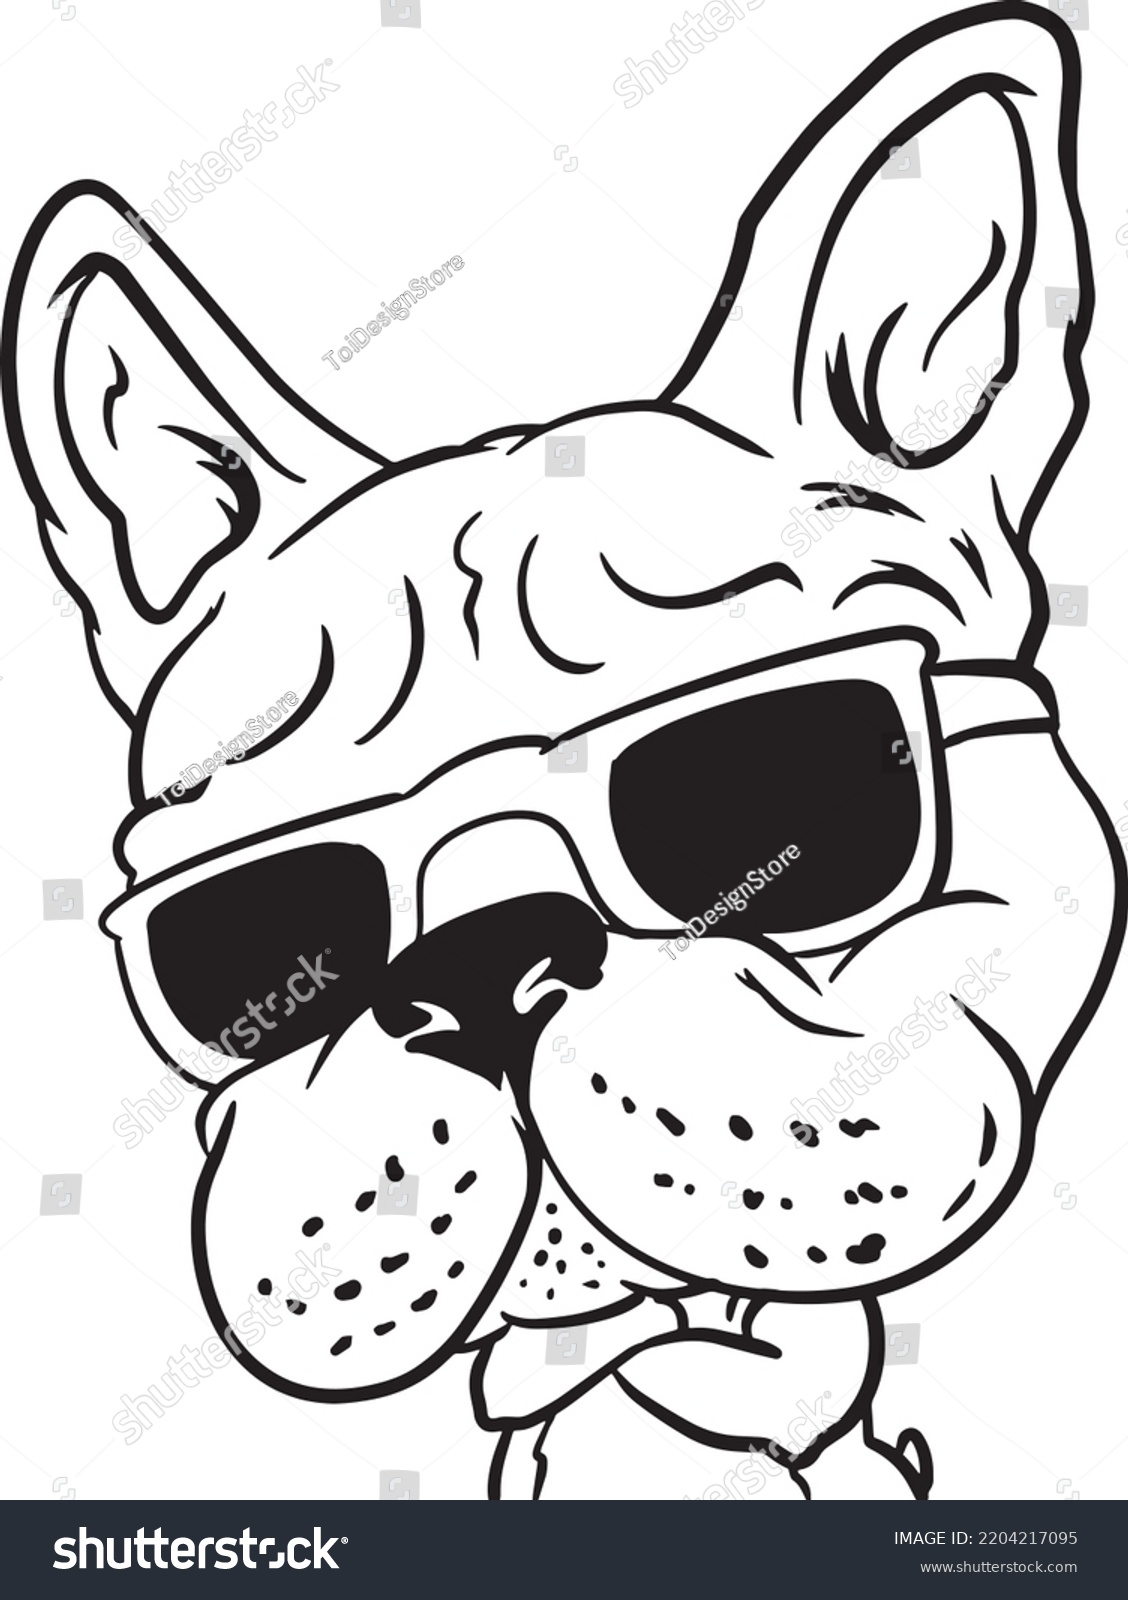 SVG of french bulldog sunglass svg, bulldog face svg,dog with sunglass, instant download file svg